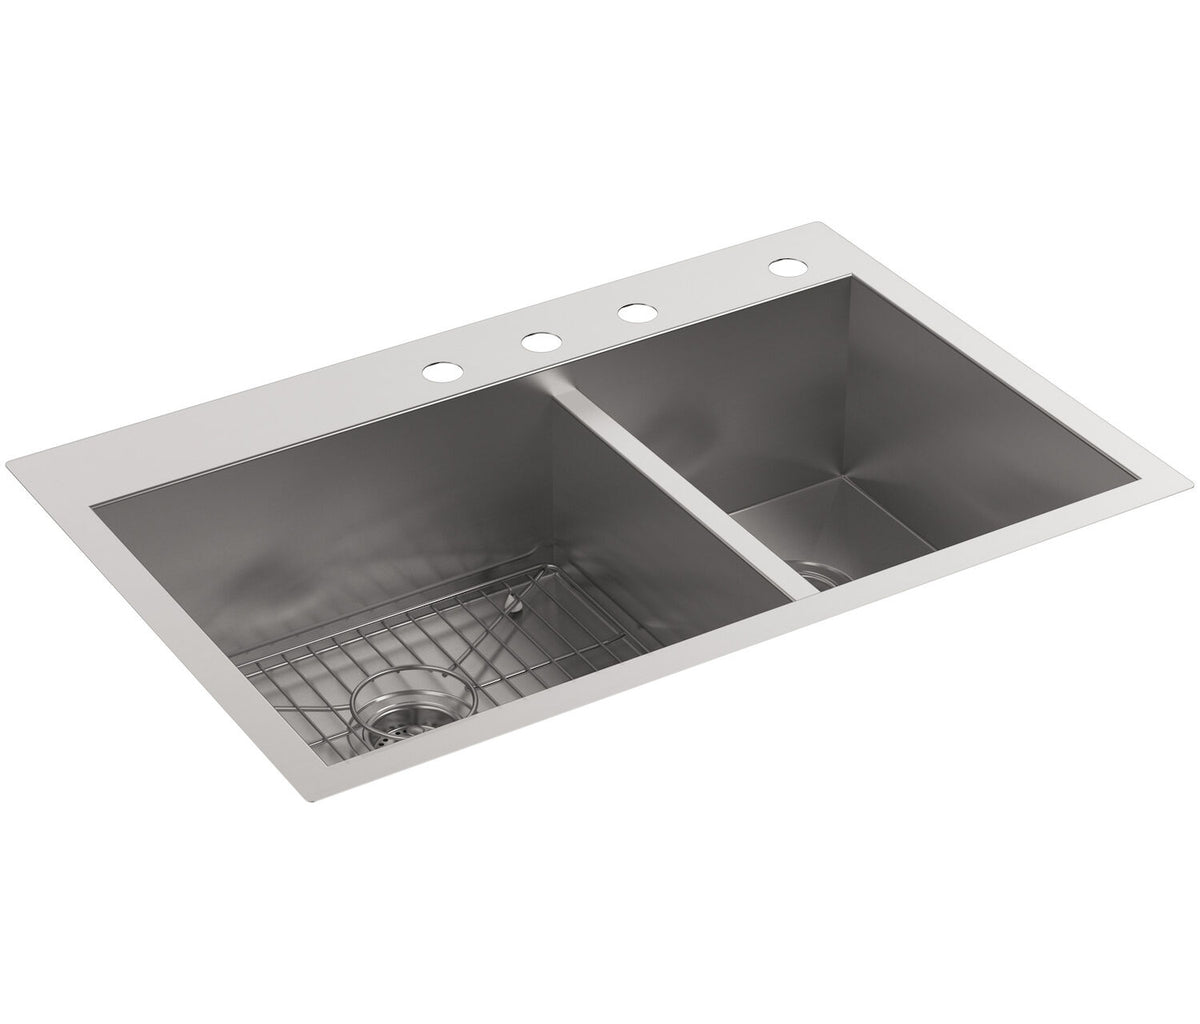 VAULT™ 33 X 22 X 9-5/16 INCHES TOP-/UNDER-MOUNT LARGE/MEDIUM DOUBLE-BOWL KITCHEN SINK WITH 4 FAUCET HOLES